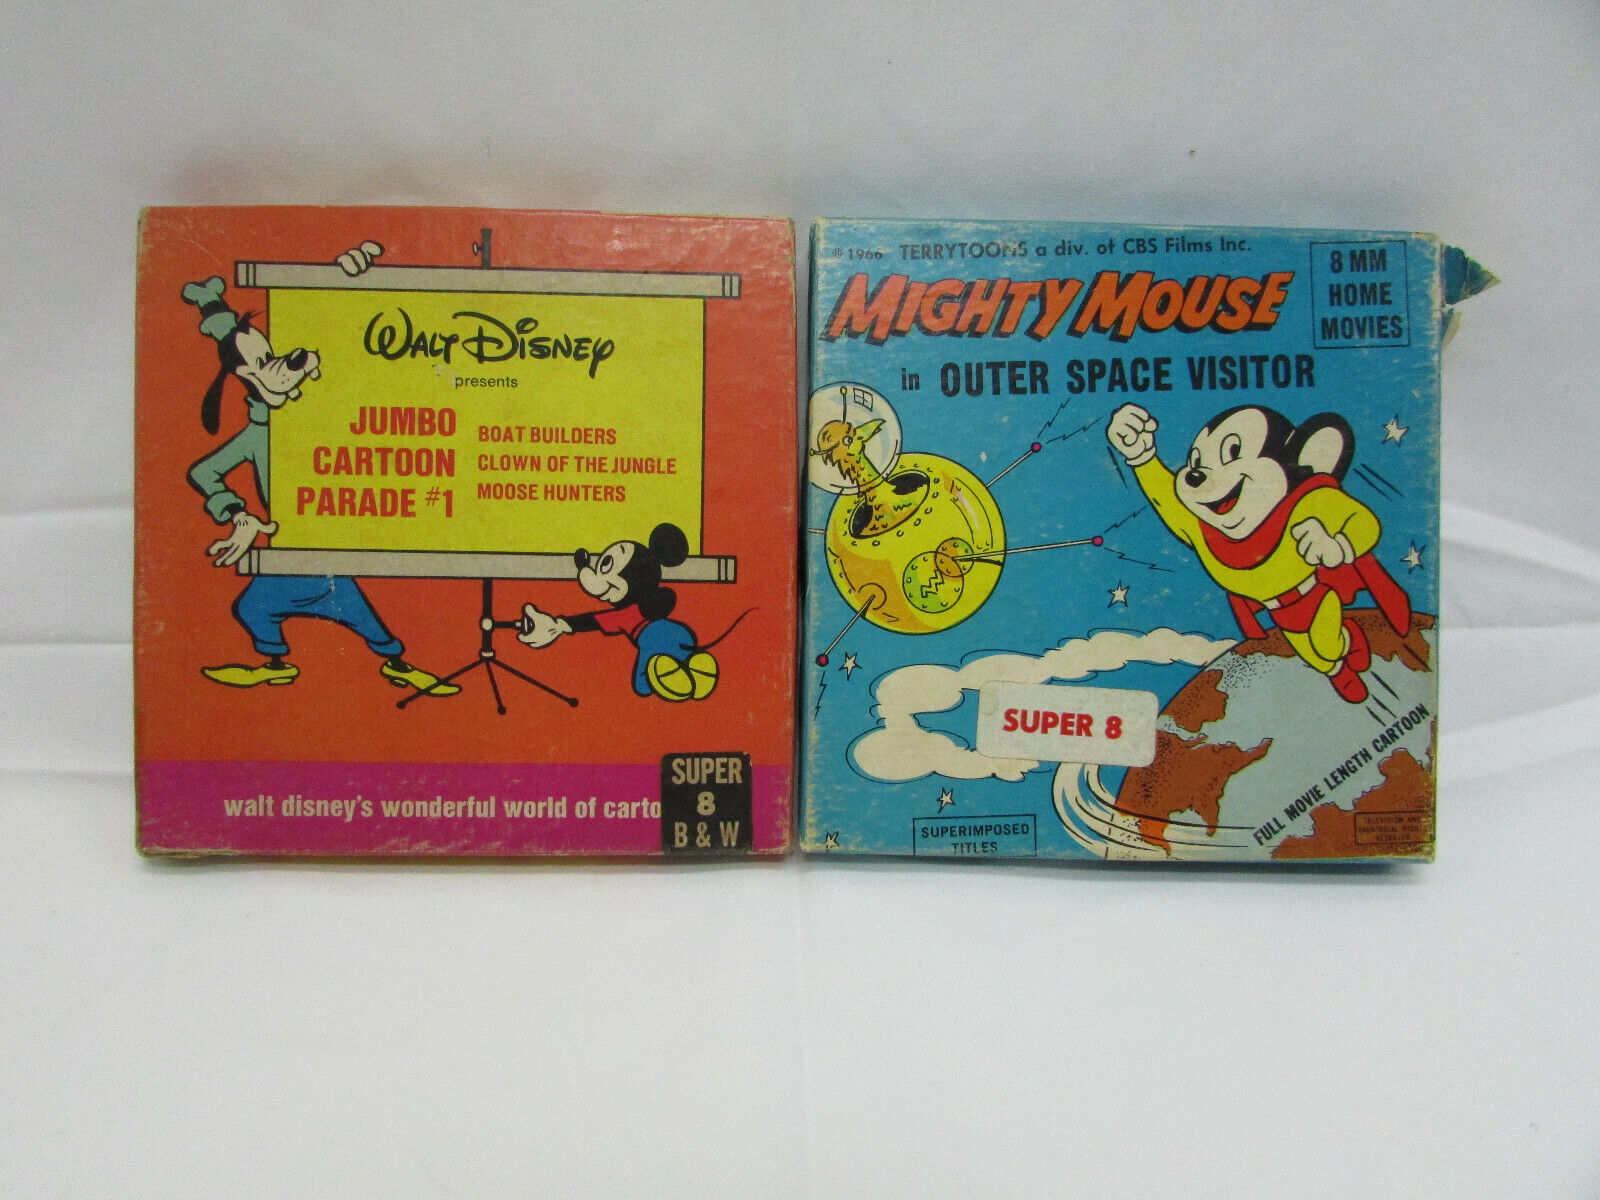 Antique VTG 8mm Home Movies Disney Jumbo Cartoon Parade #1 Mighty Mouse Super 8